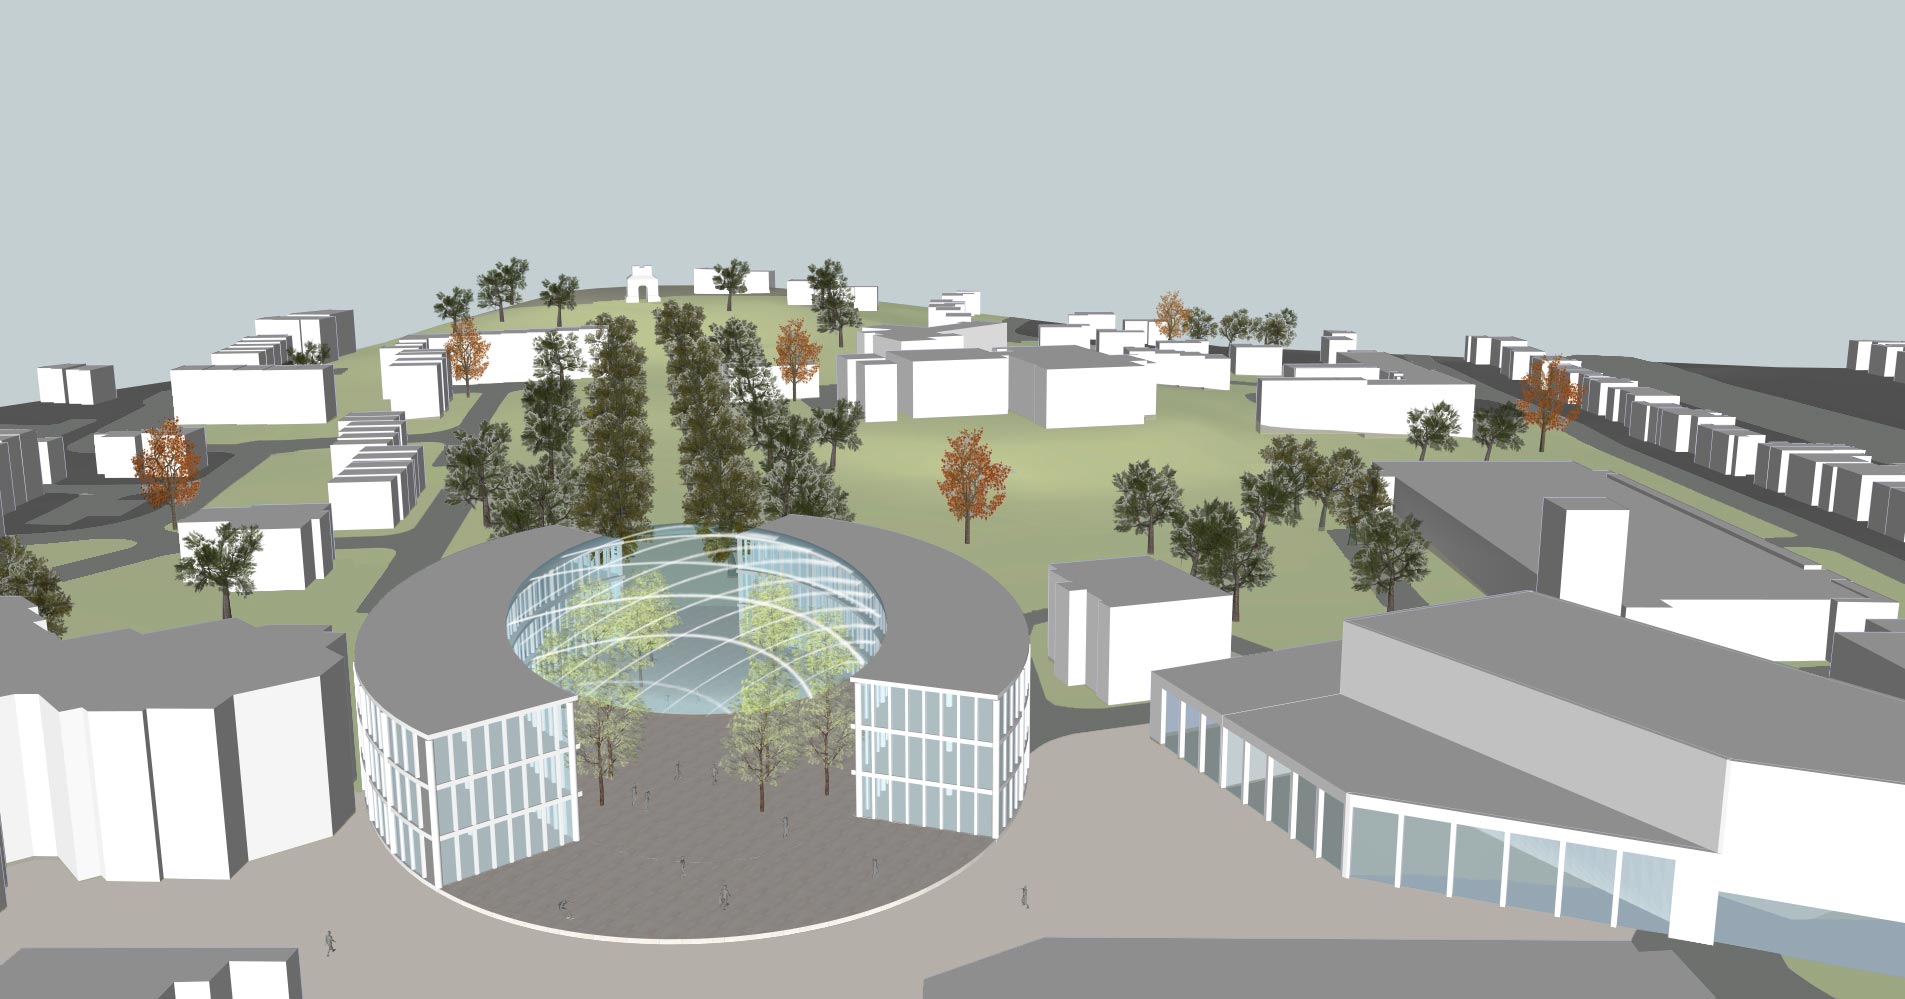 Camberley Cultural Quarter Masterplan - Front view with park